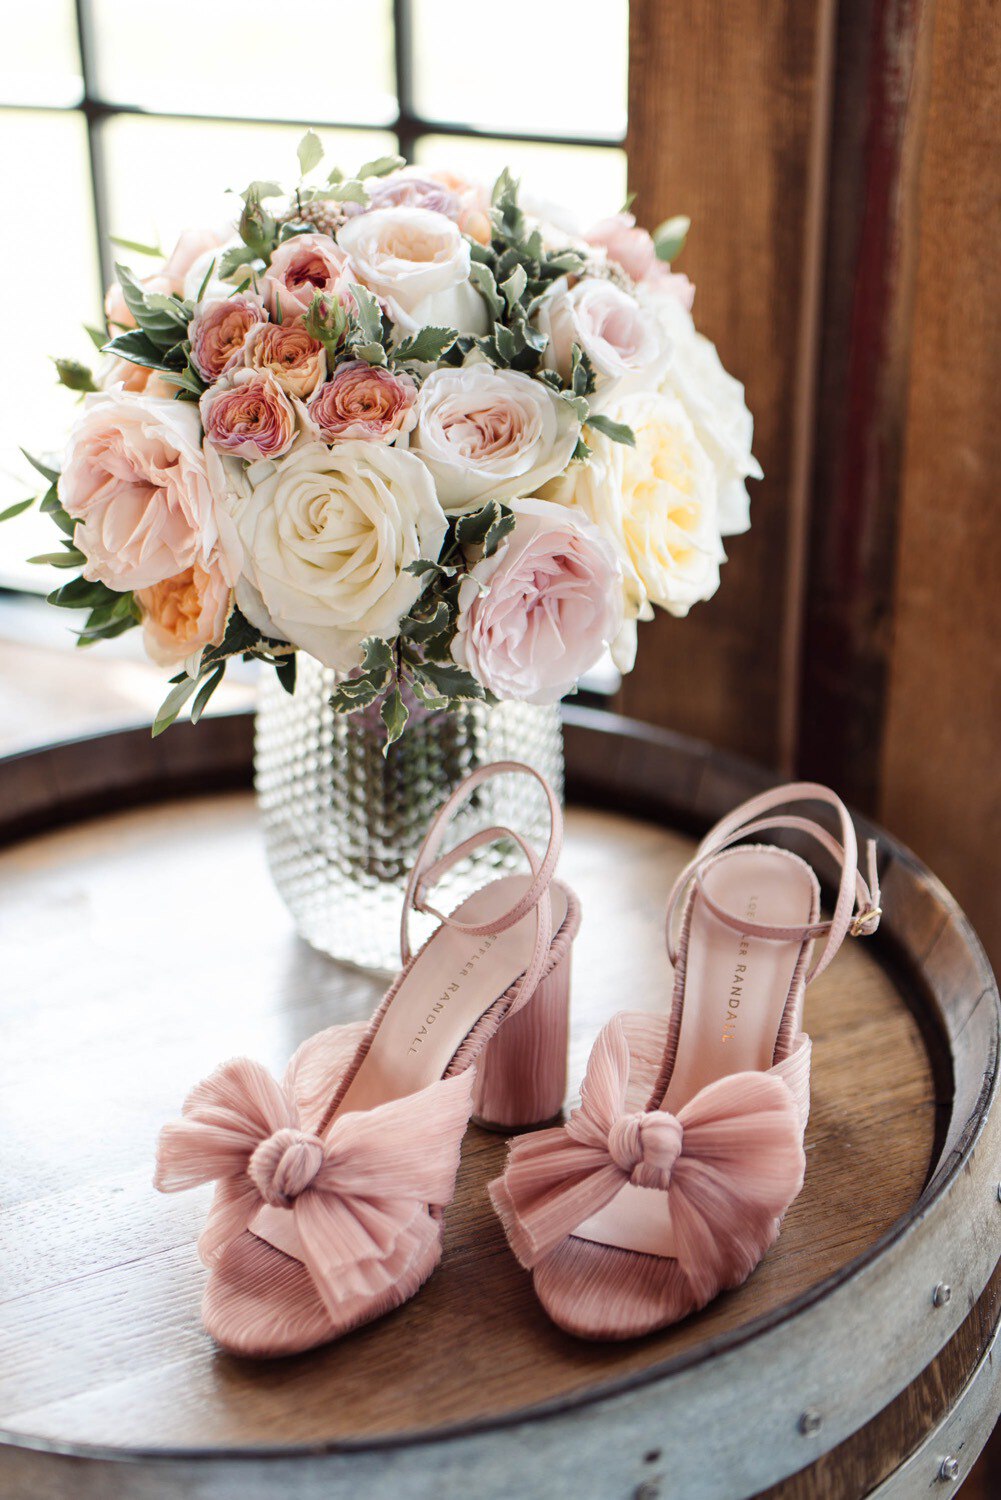 Bridal bouquet and shoes with bows